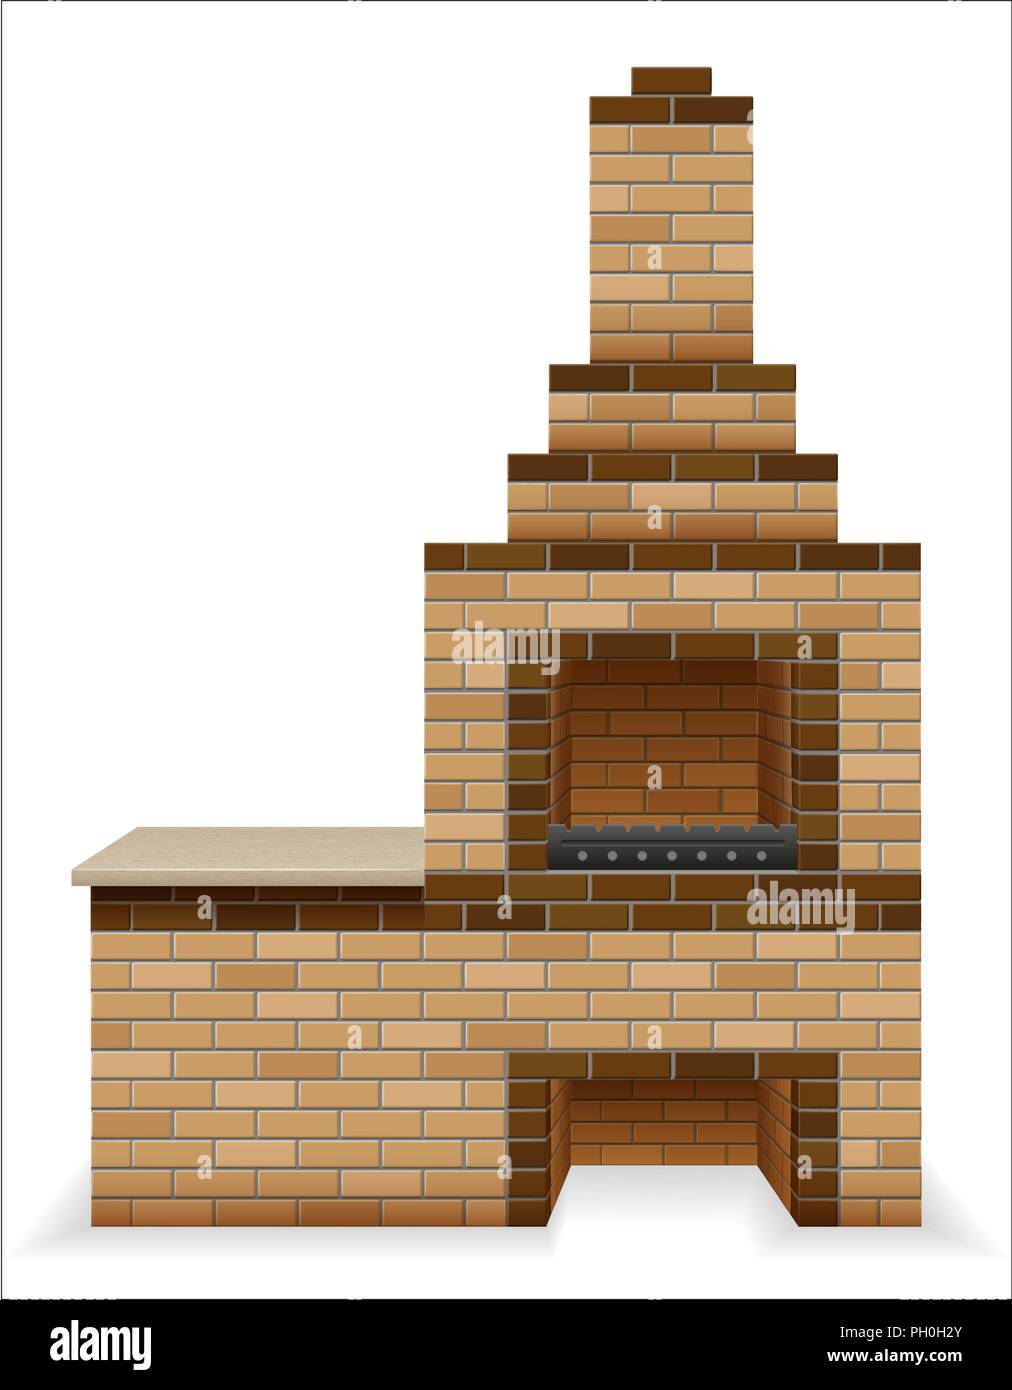 barbecue oven built of bricks vector illustration isolated on white background Stock Vector